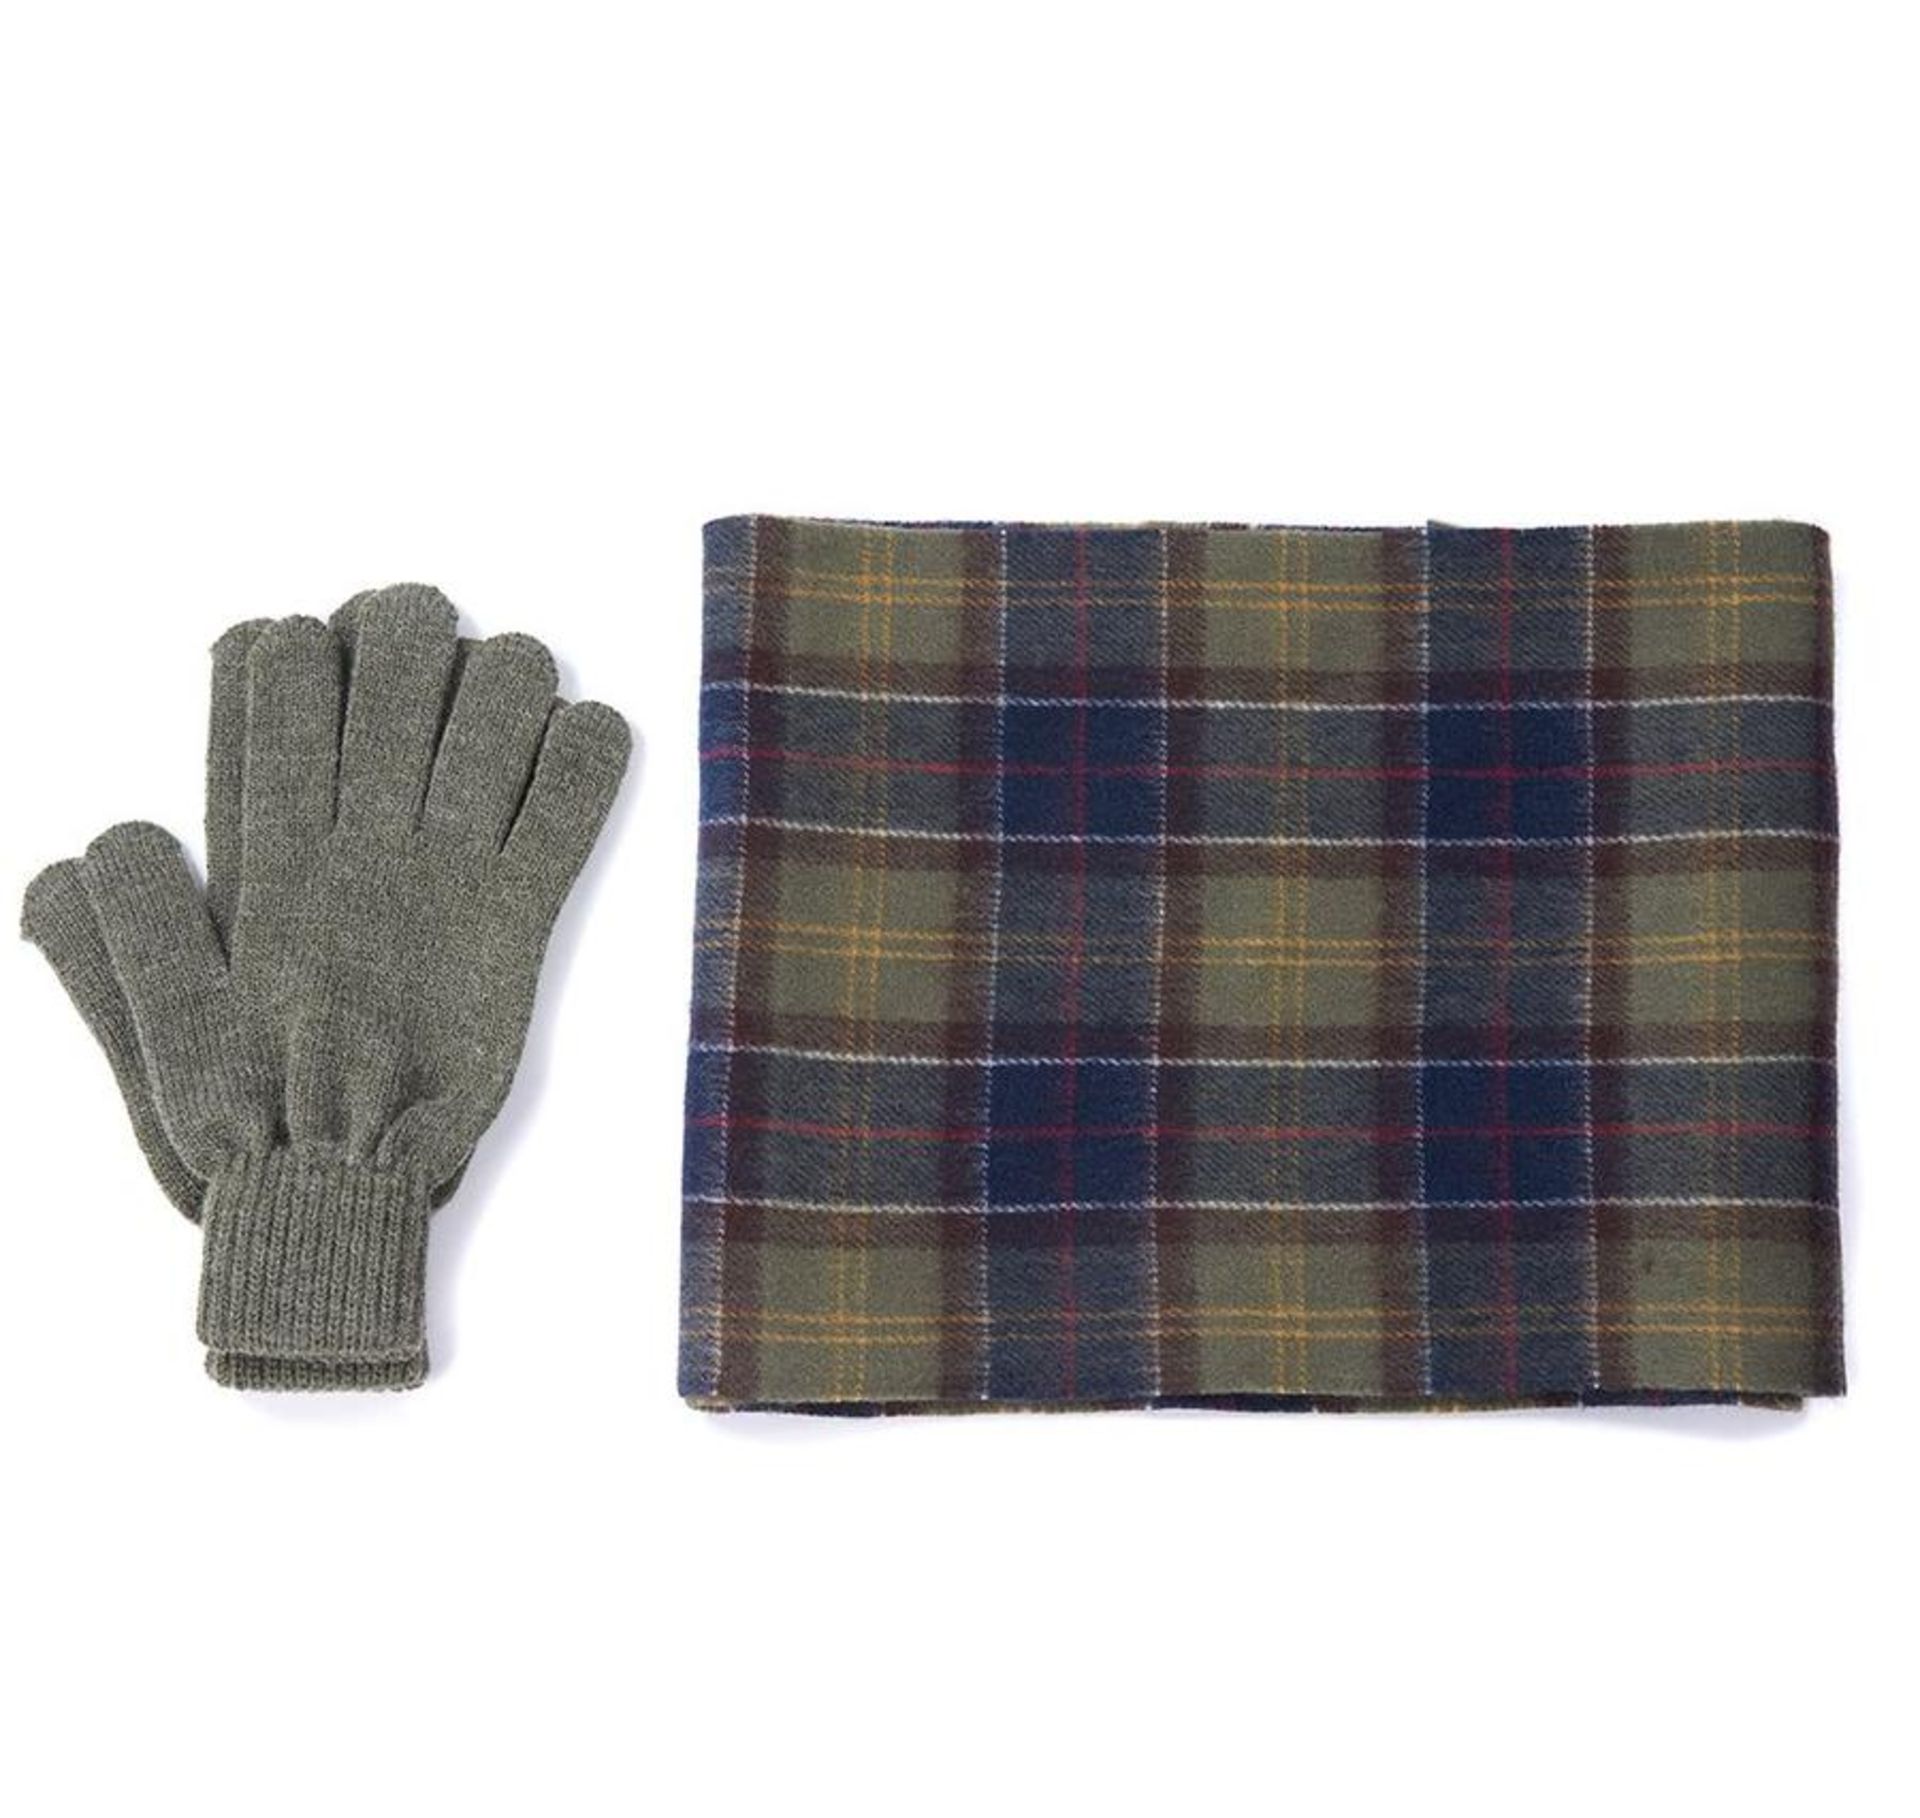 BRAND NEW BARBOUR LAMBSWOOL TARTAN GLOVE AND SCARF SET (2448) RRP £55